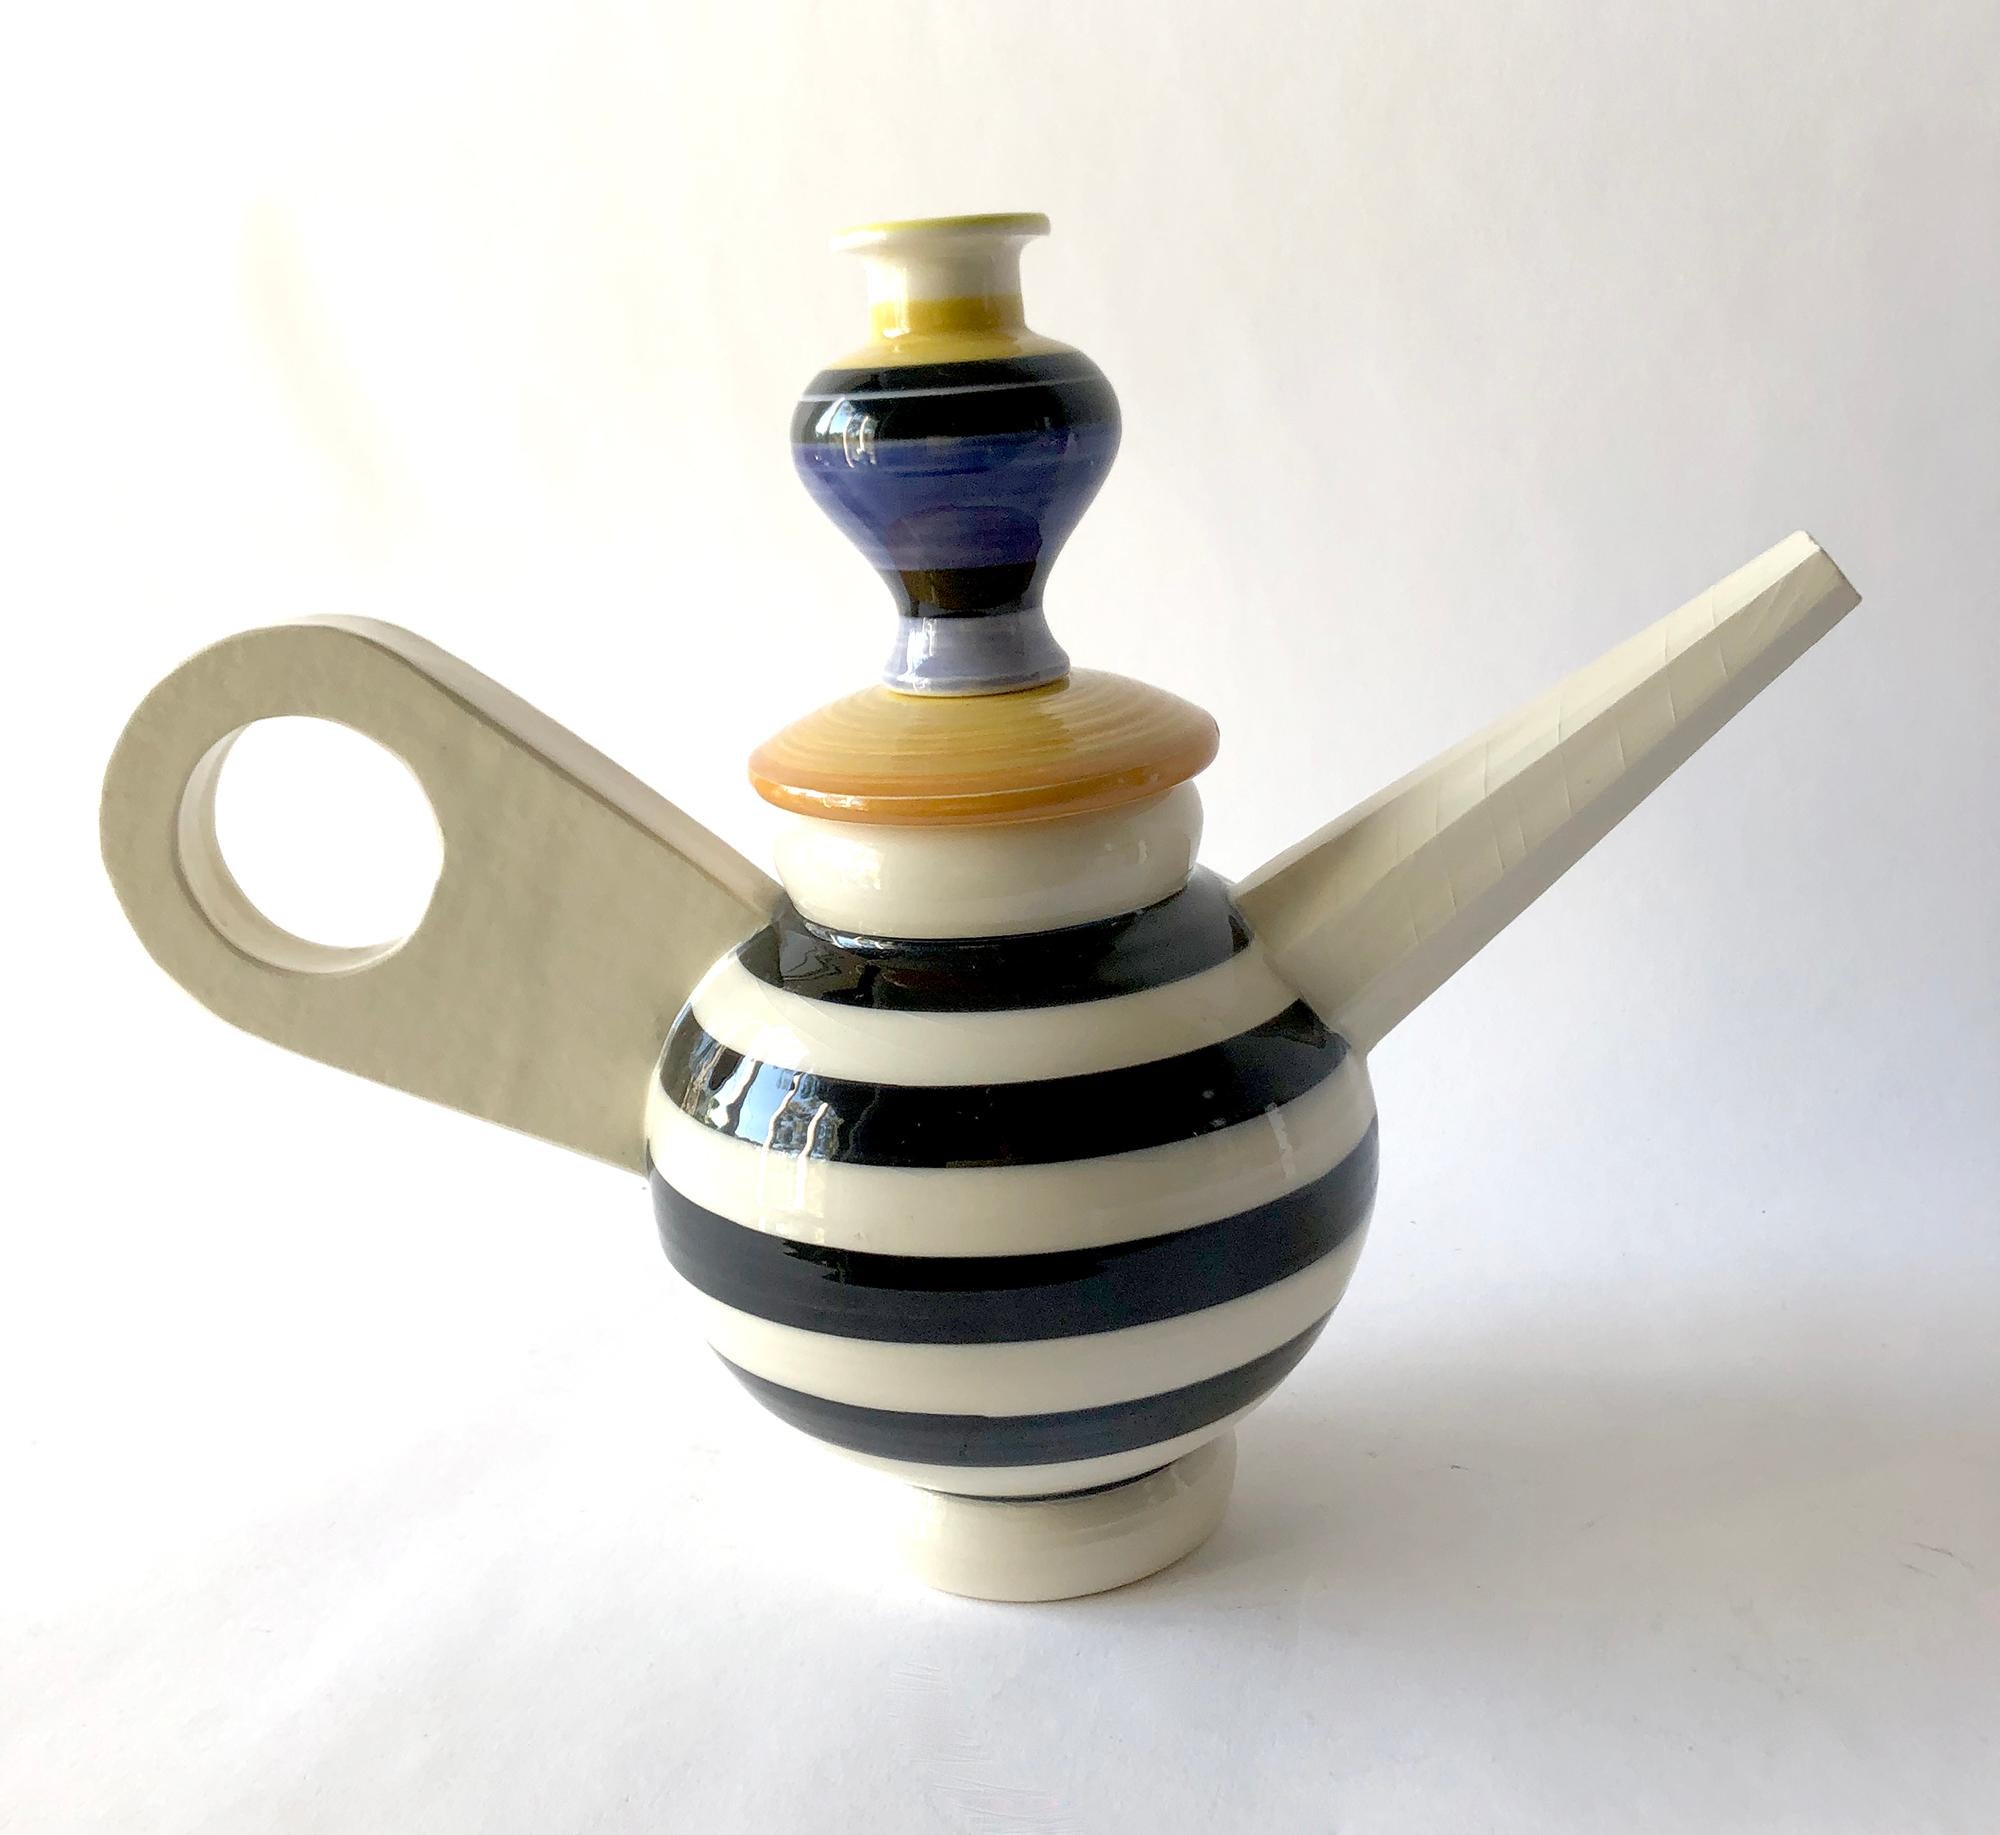 Spouted teapot created by Los Angeles artist and designer of the Memphis Group, Peter Shire. Teapot measures 12.5